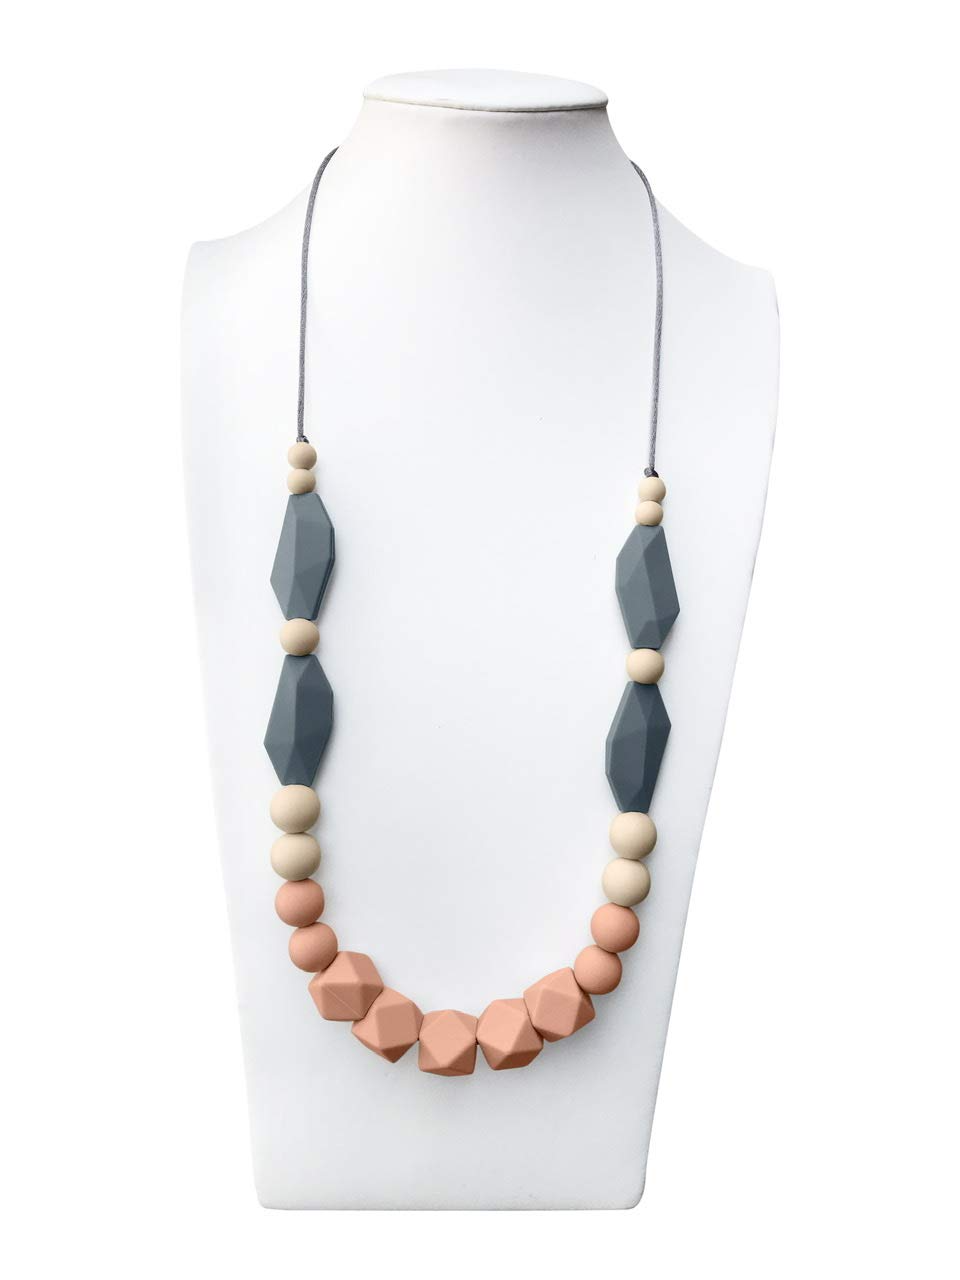 Silicone Teething Necklace for Mom To Wear (Peach/Ivory/Grey)